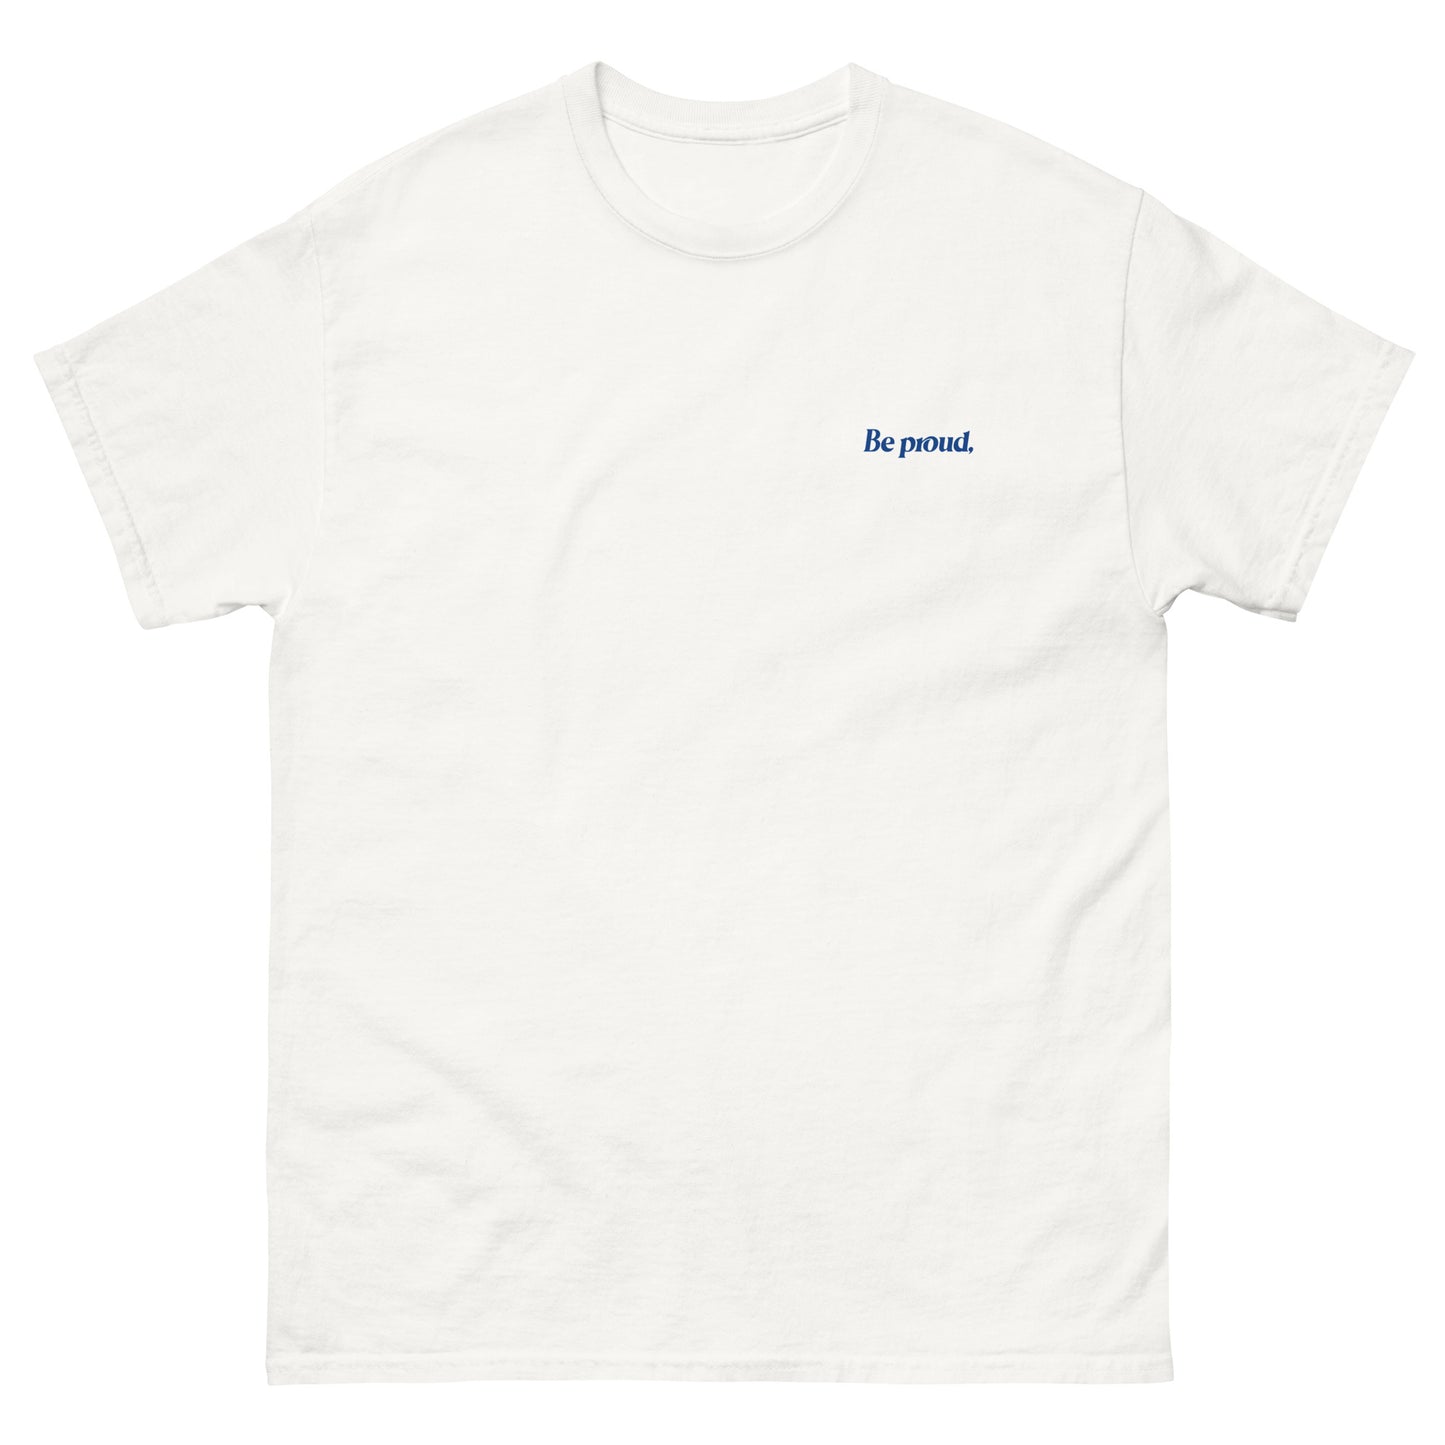 White High Quality Tee - Front Design with "Be proud, " print on left chest - Back Design with a Phrase "Be proud, you survived the days you thought you couldn't." print